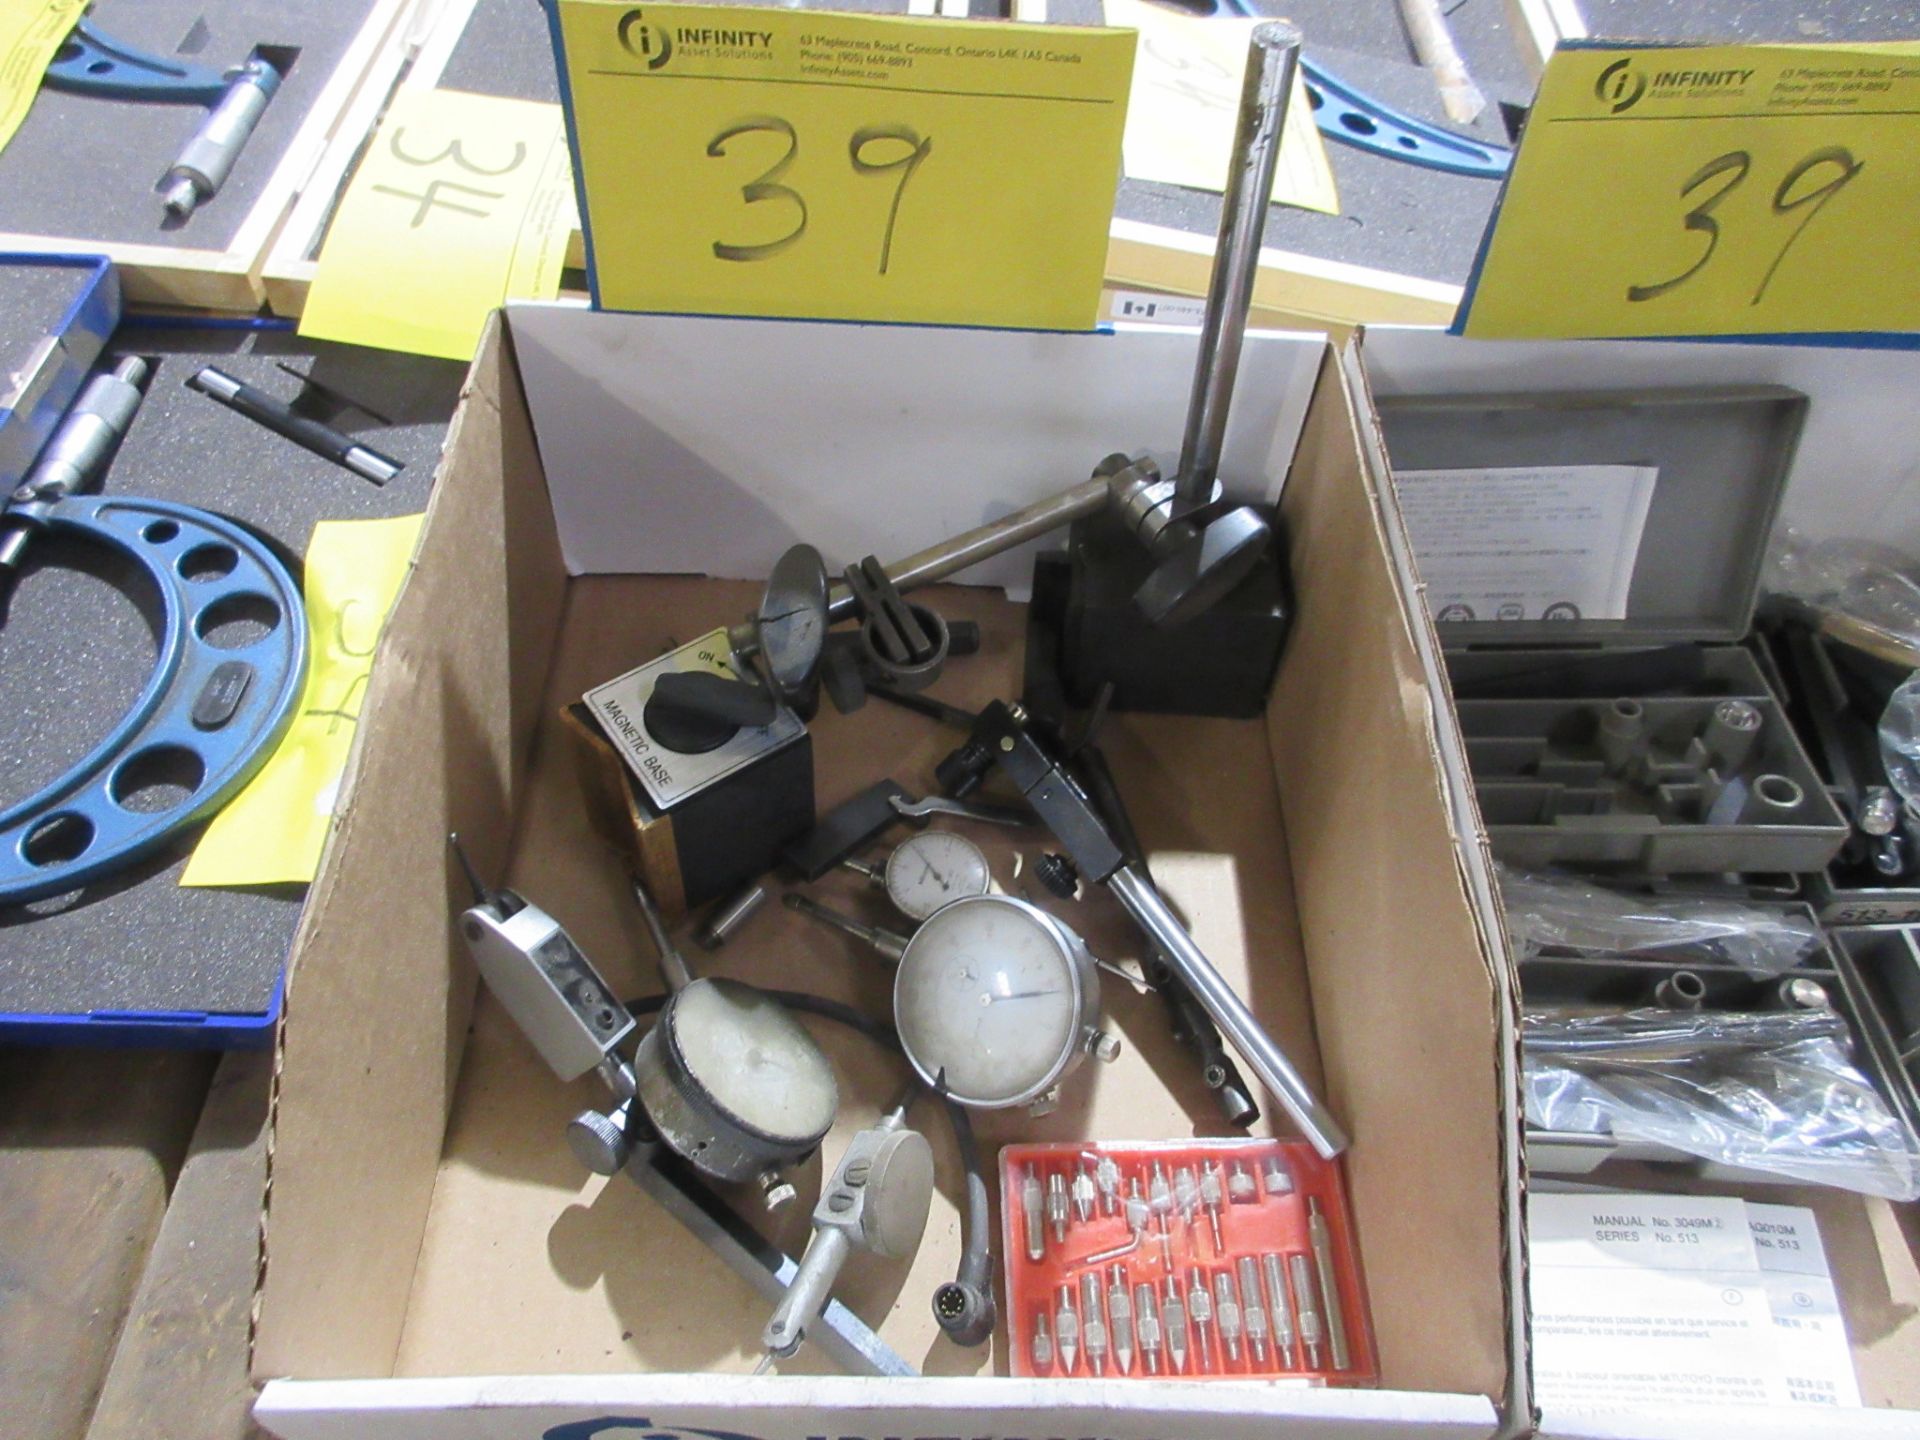 LOT OF (3) BOXES OF 1.4-2.5", .7-1.4" MITUTOYO HOLE GAUGE SETS, MITUTOYO PROBE, INDICATORS, MAG - Image 5 of 5